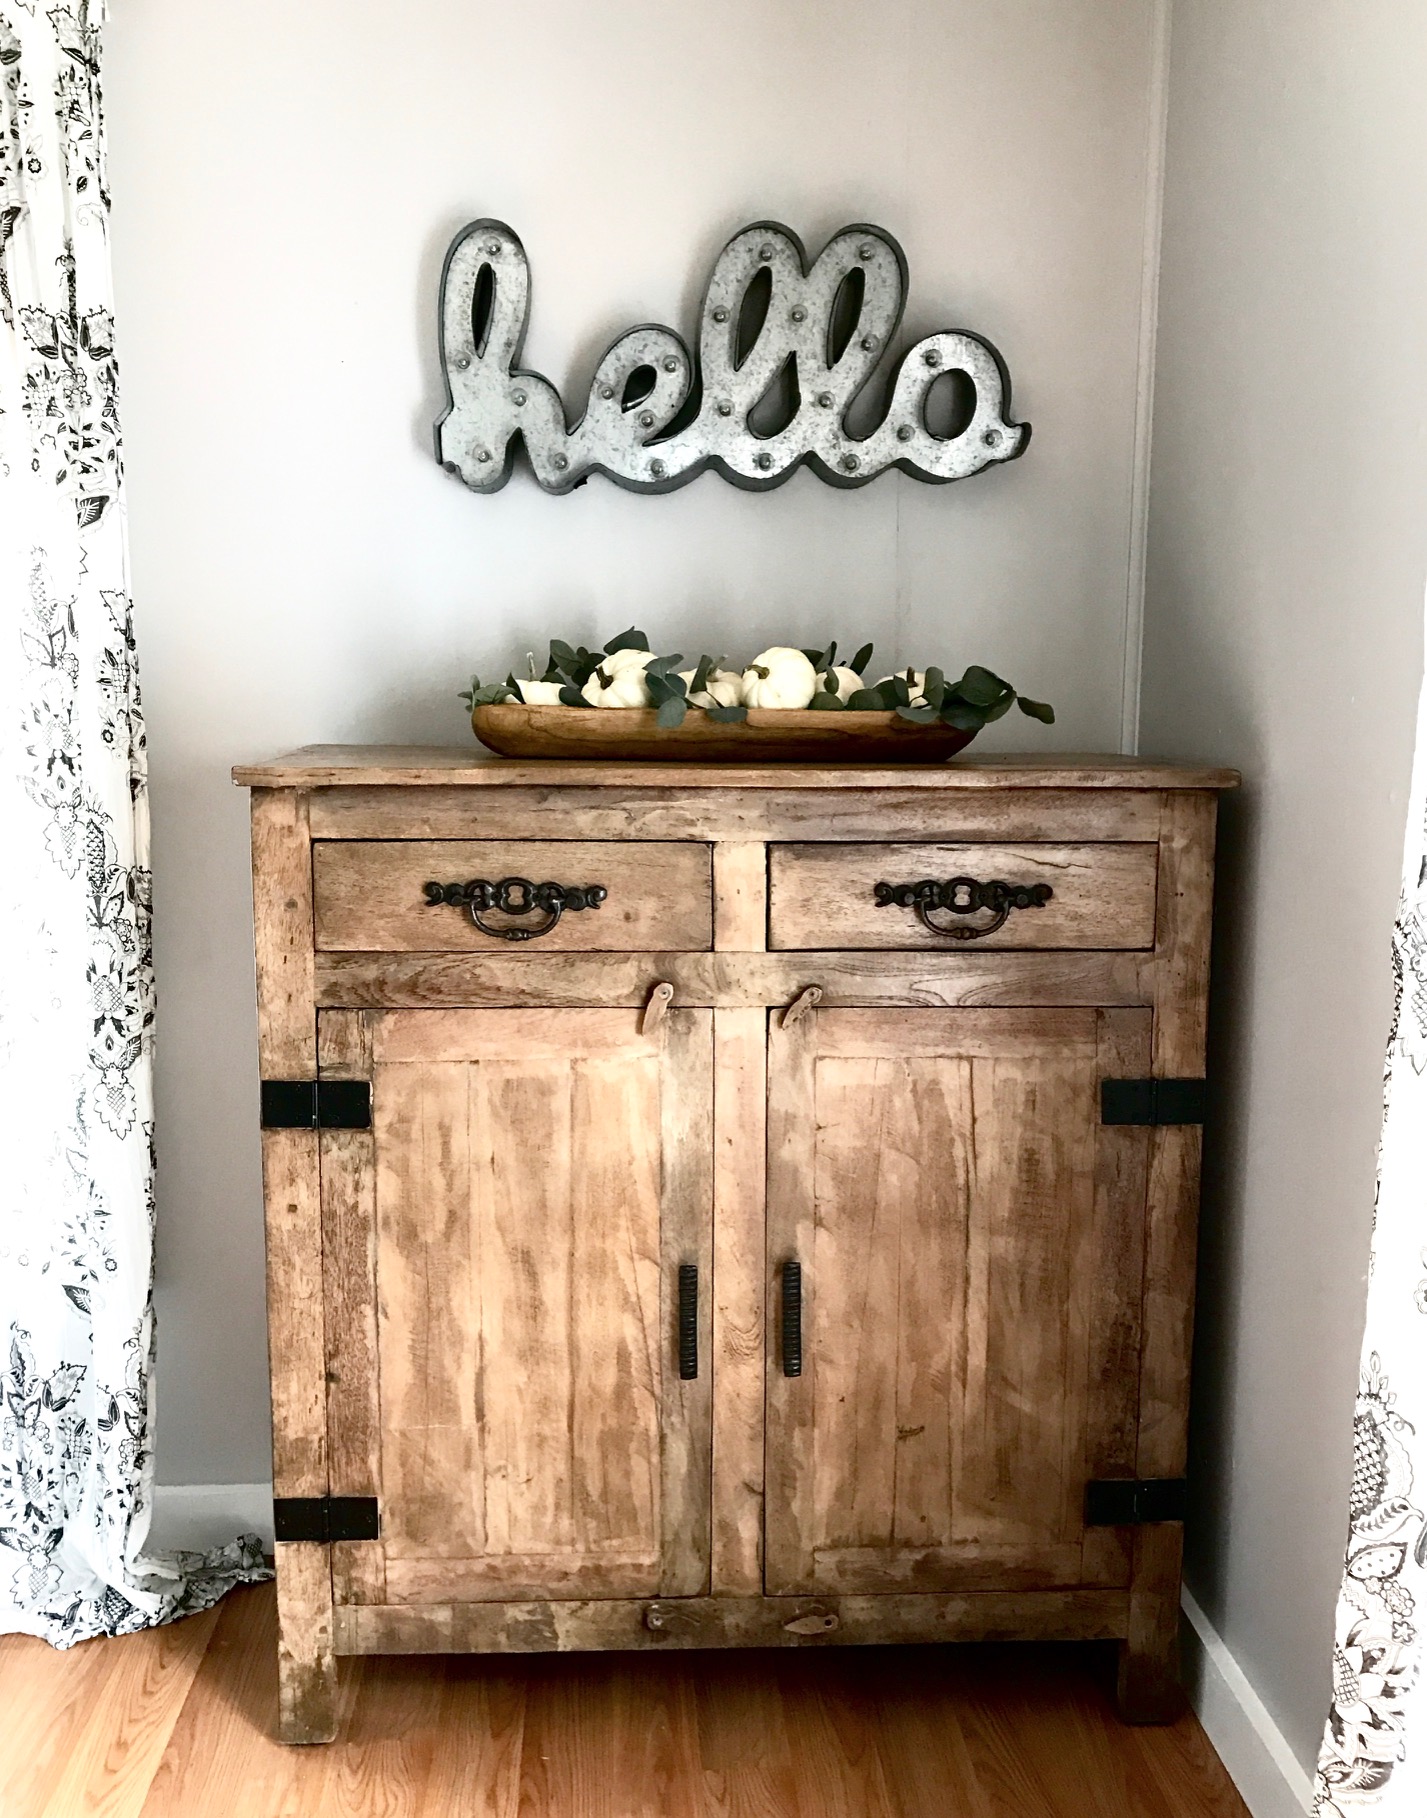 This stunning farmhouse dresser is far from missable in the corner - it's a fabulous DIY that any farmhouse lover would want